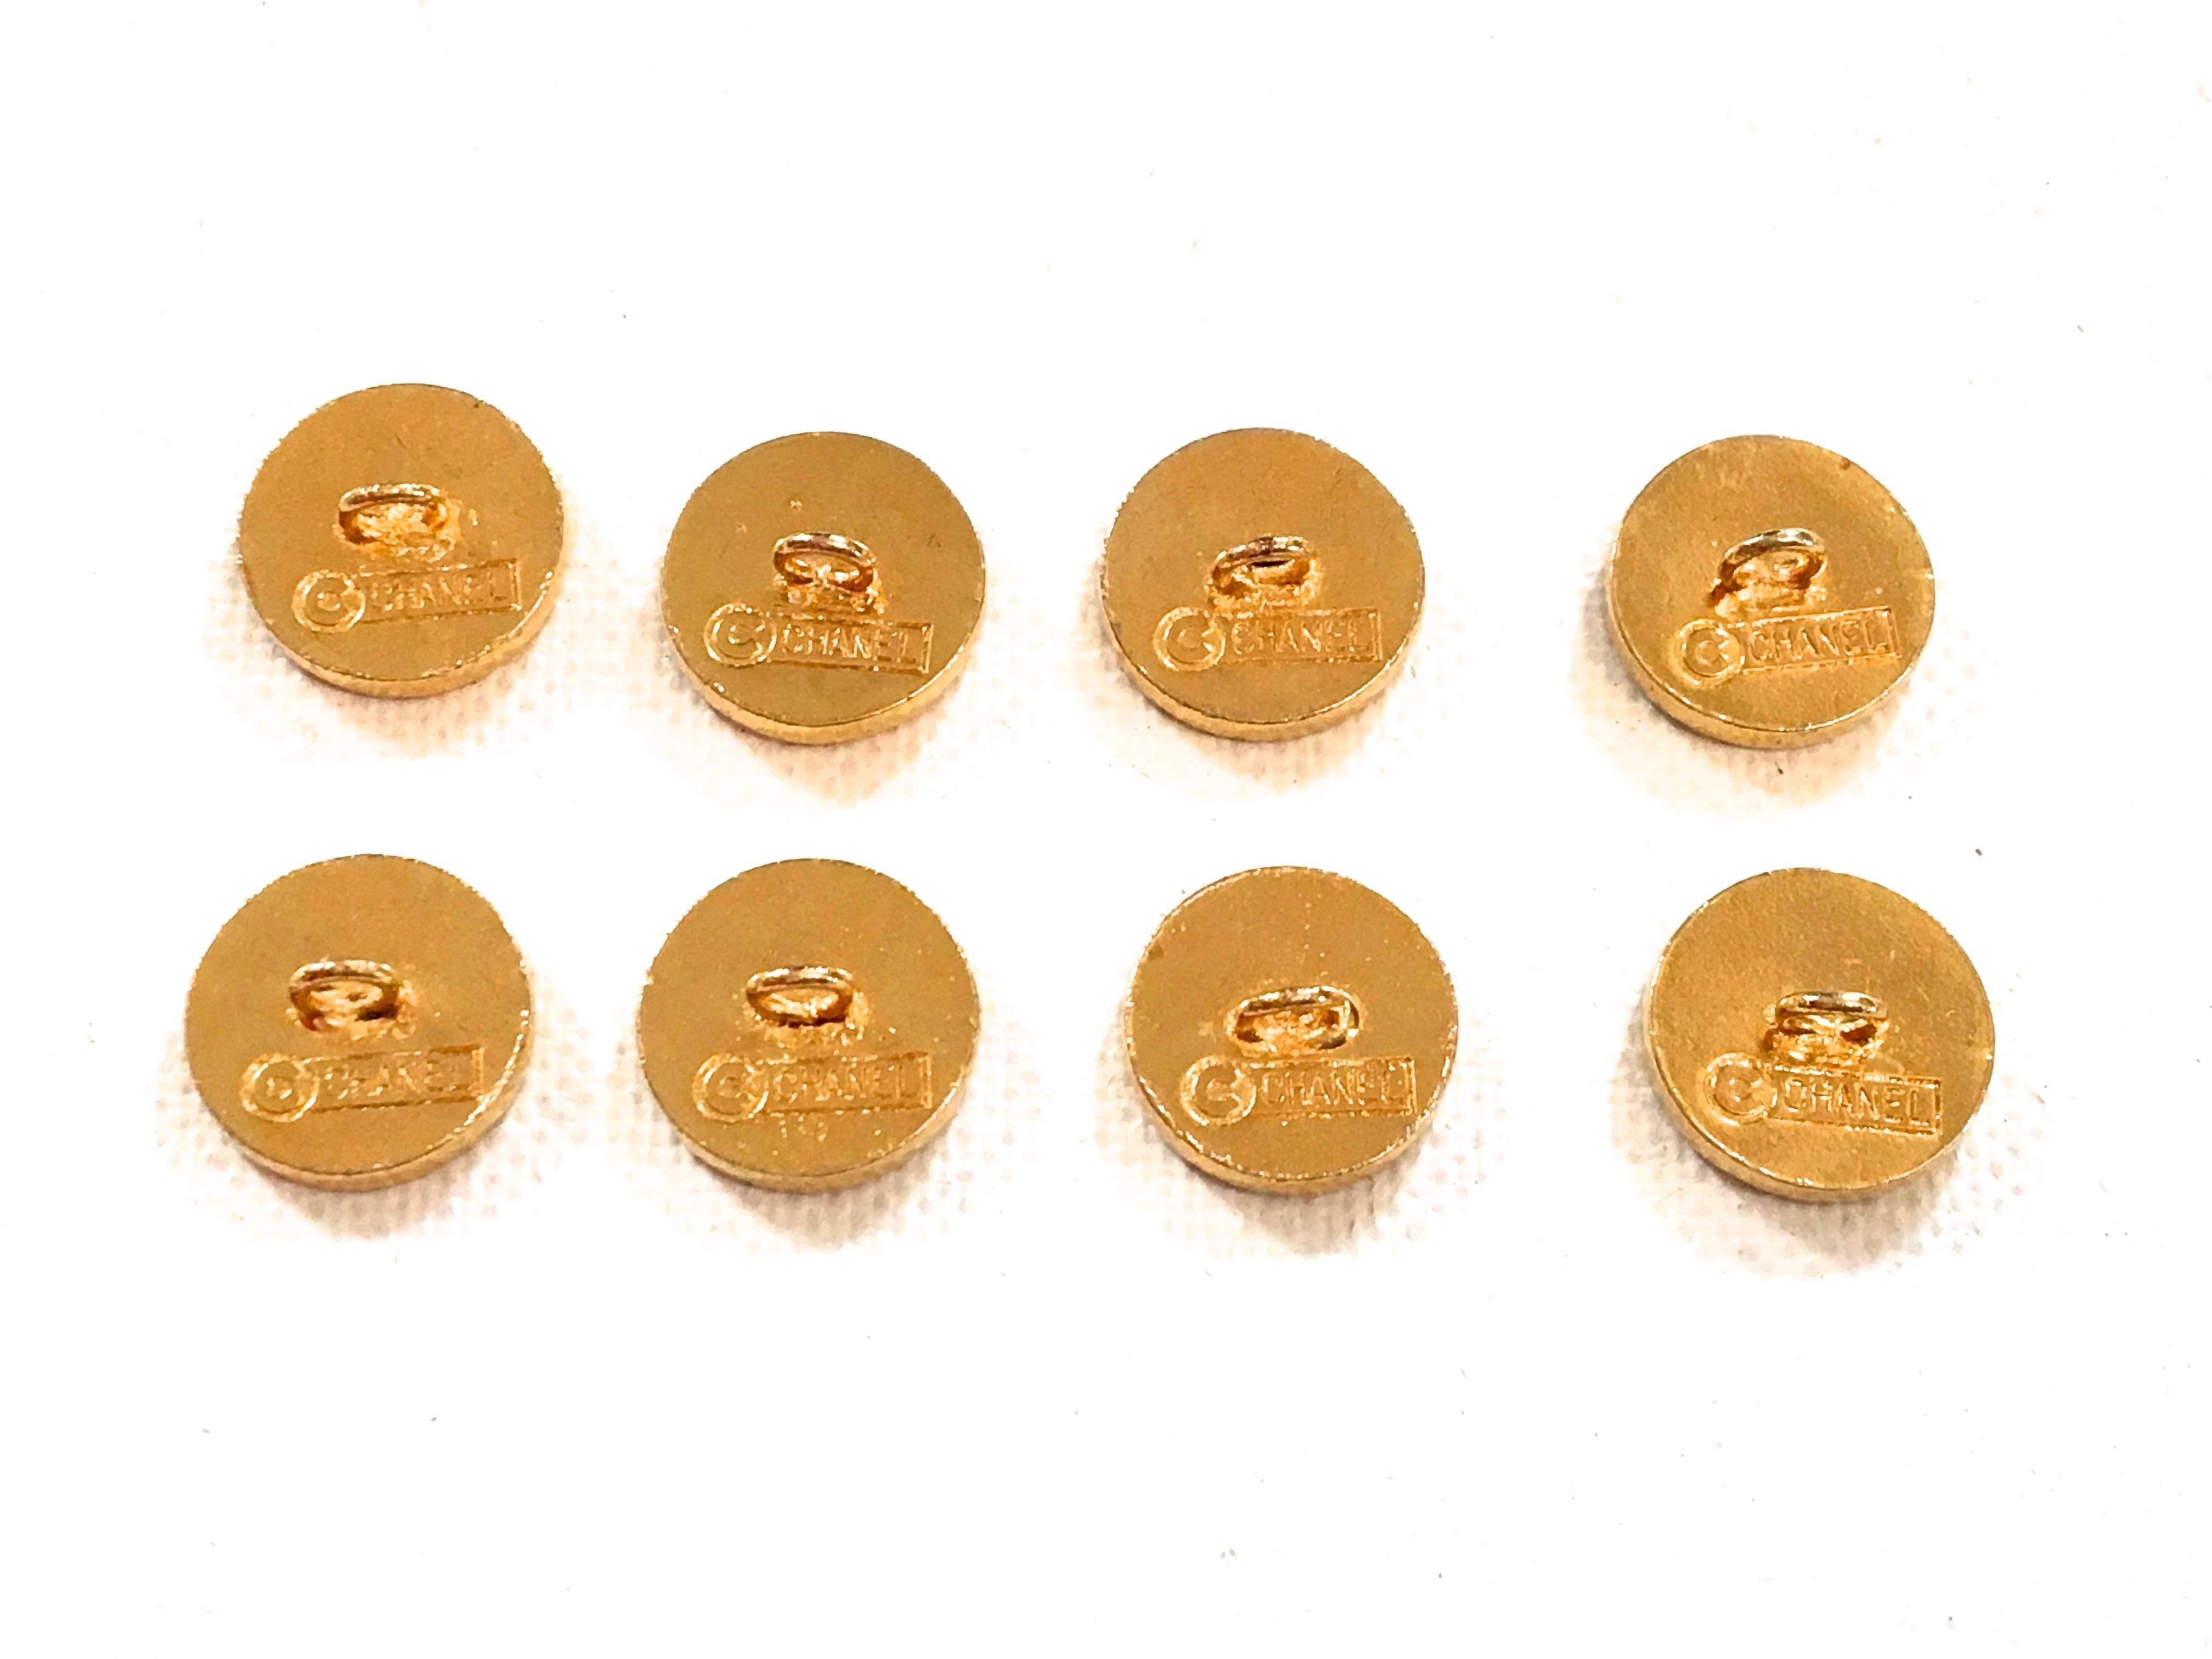 Presented here are 8 magnificent Chanel buttons. These gold tone buttons are extremely rare to find, especially in a matching set of 8. The front of the button has an elephant logo and on top reads, 'Chanel Paris.' Beneath the elephant it says